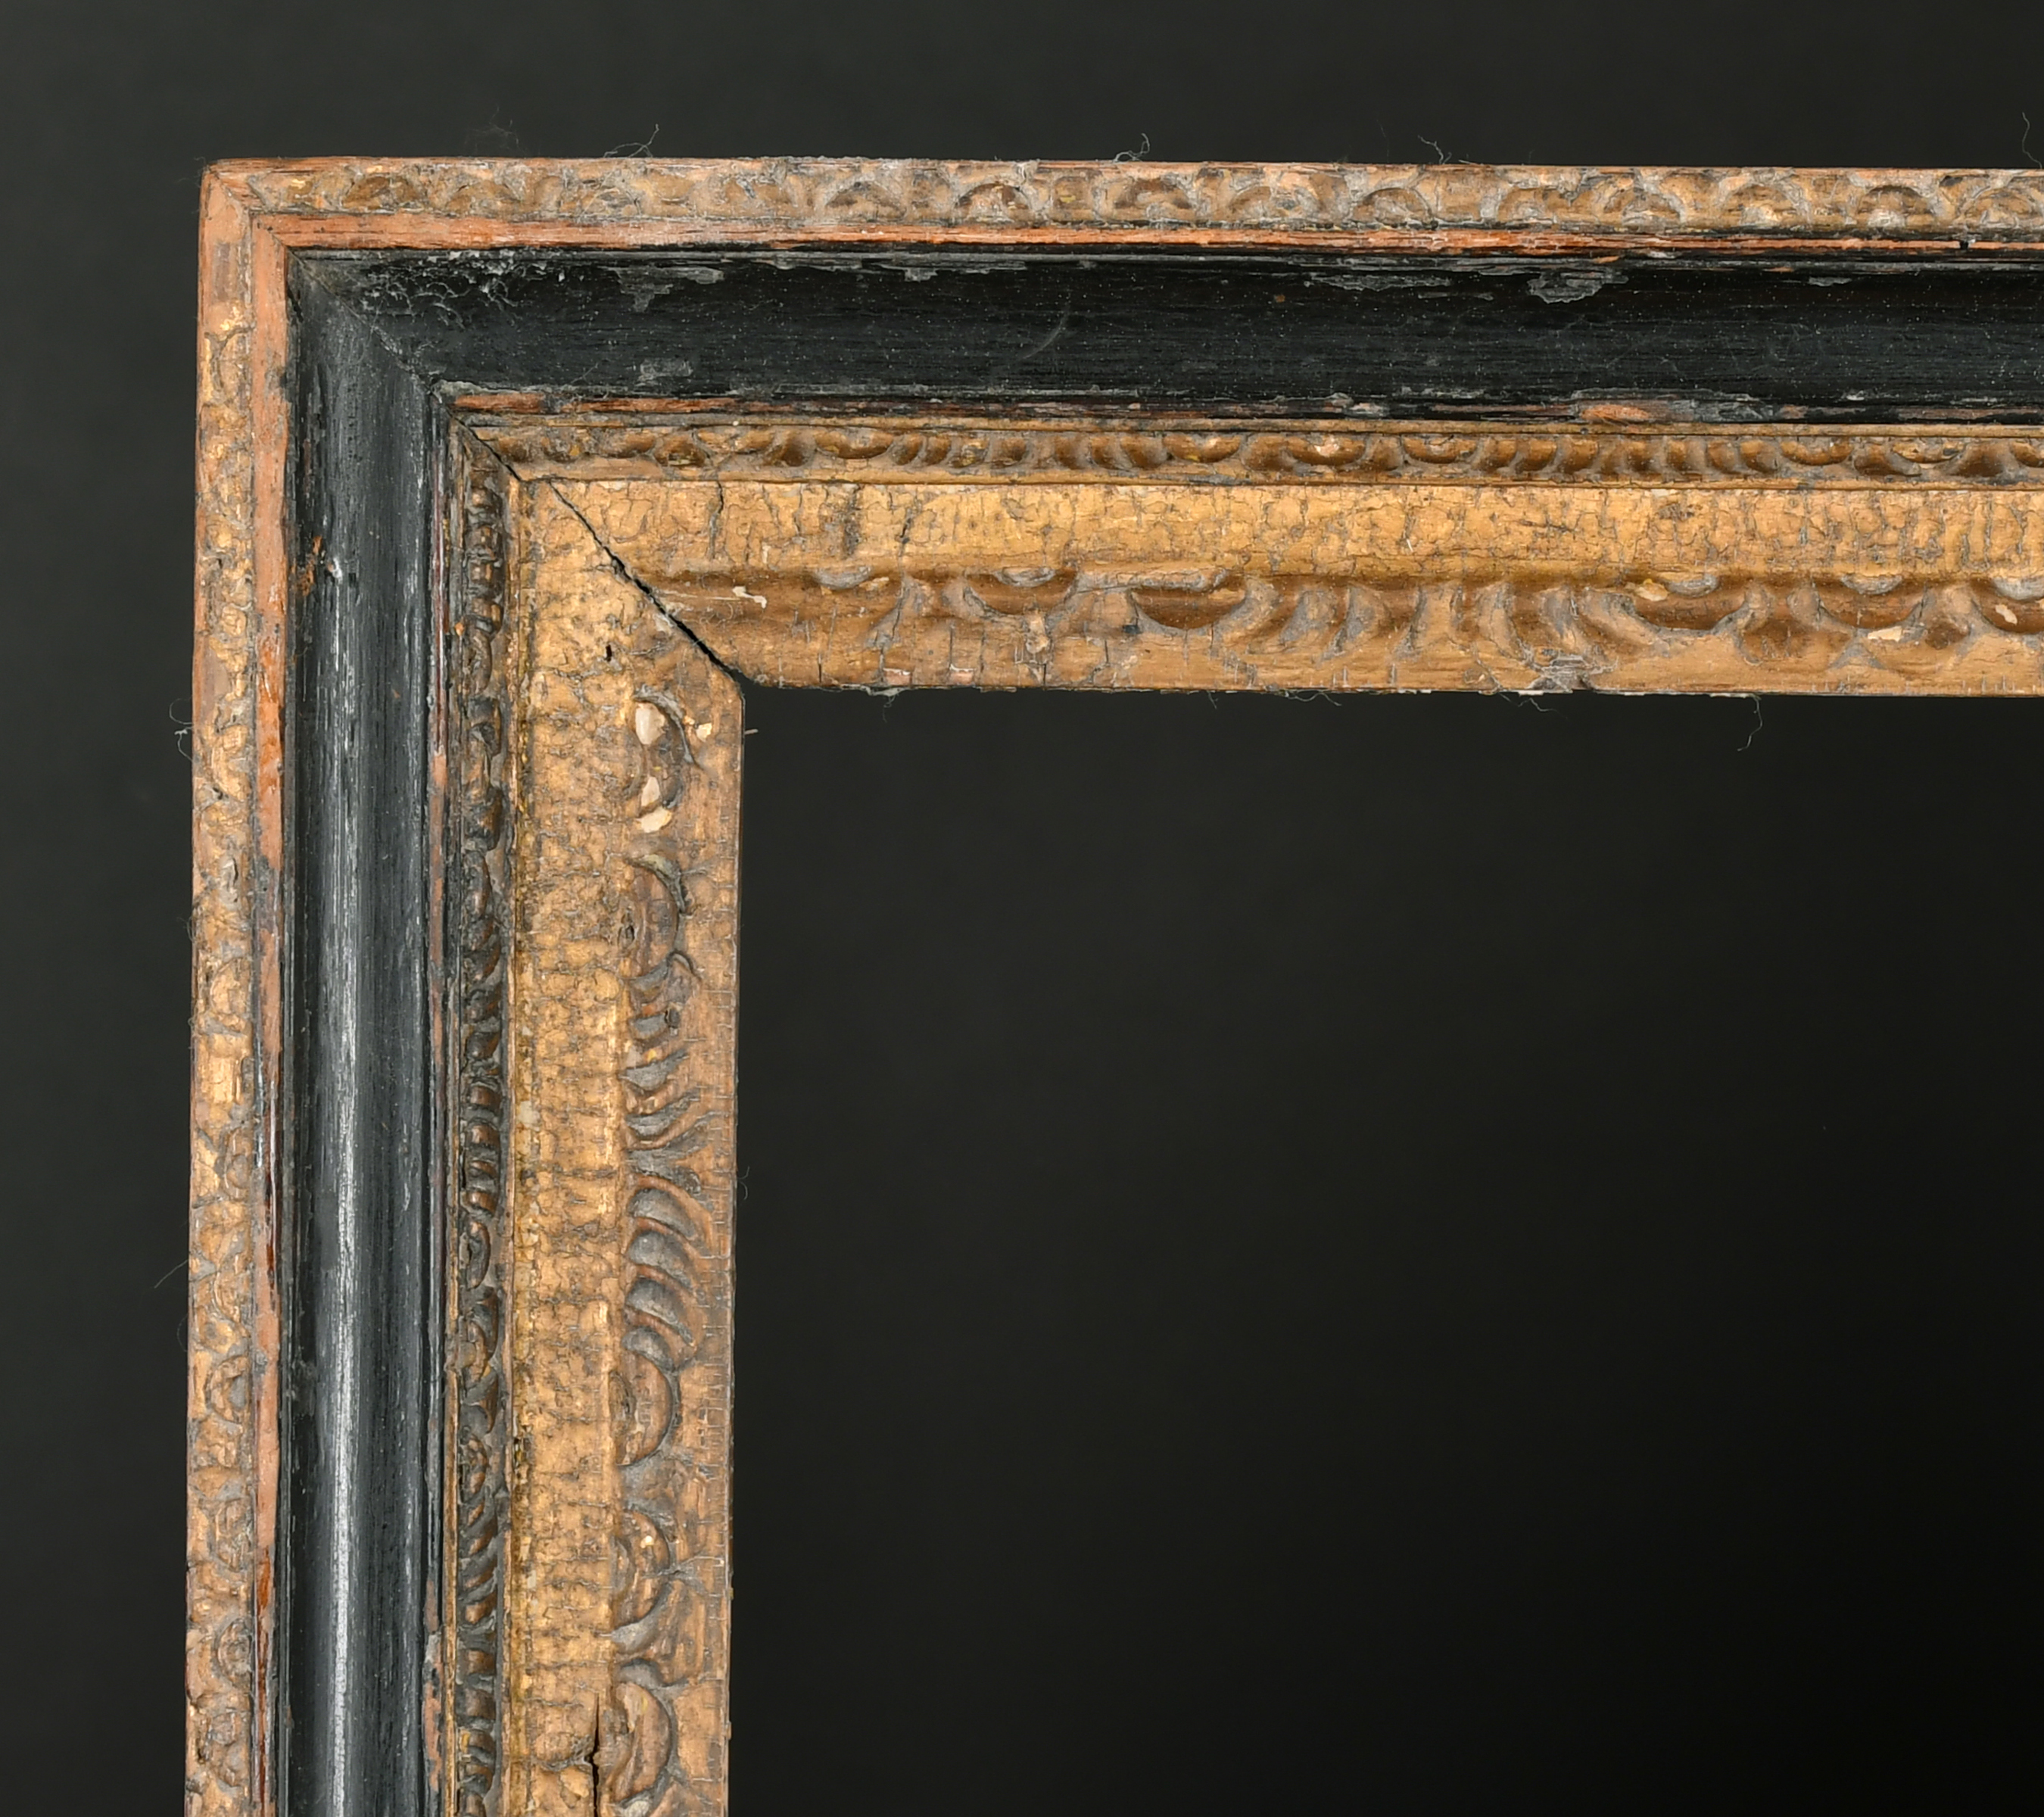 18th Century French School. A Carved Giltwood and Black Hogarth Frame, rebate 22.25" x 18.25" (56.